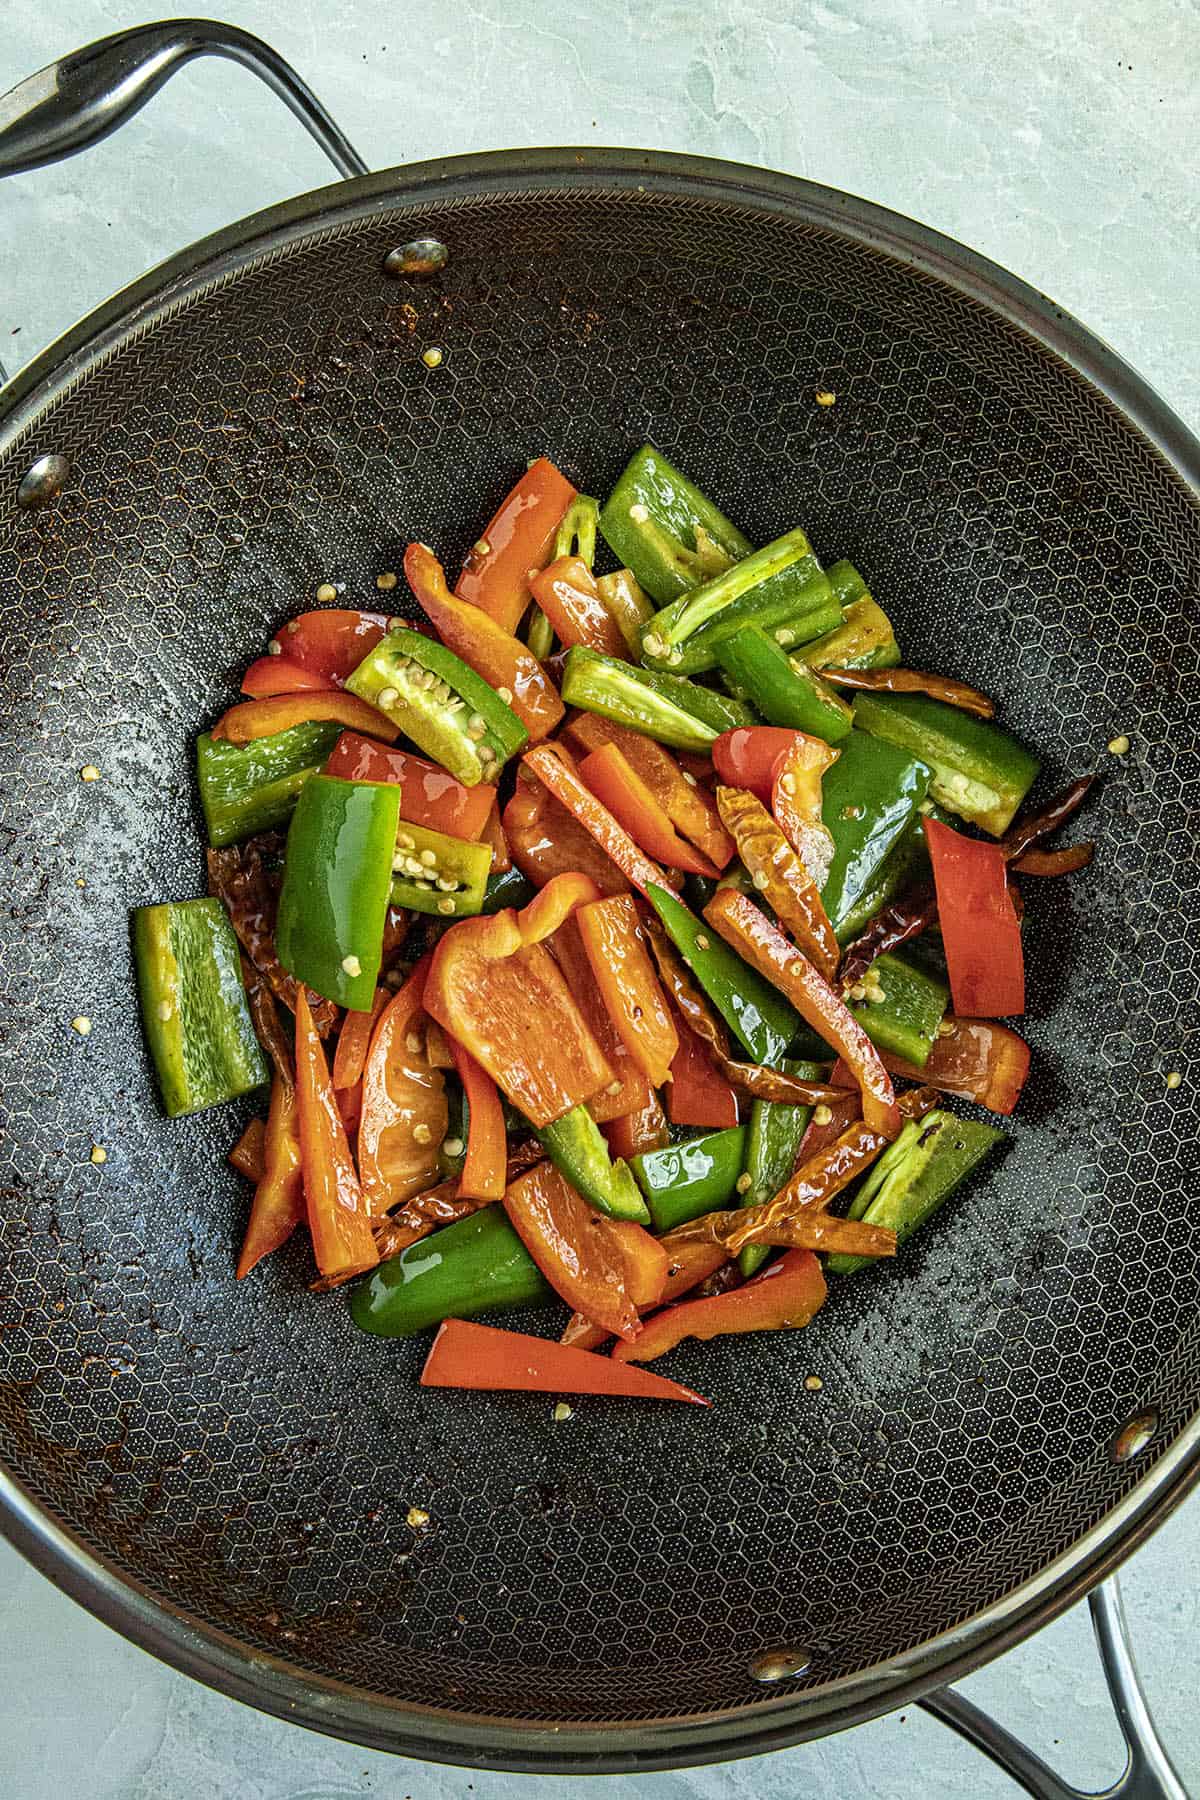 Stir frying peppers and vegetables to make Kung Pao Shrimp